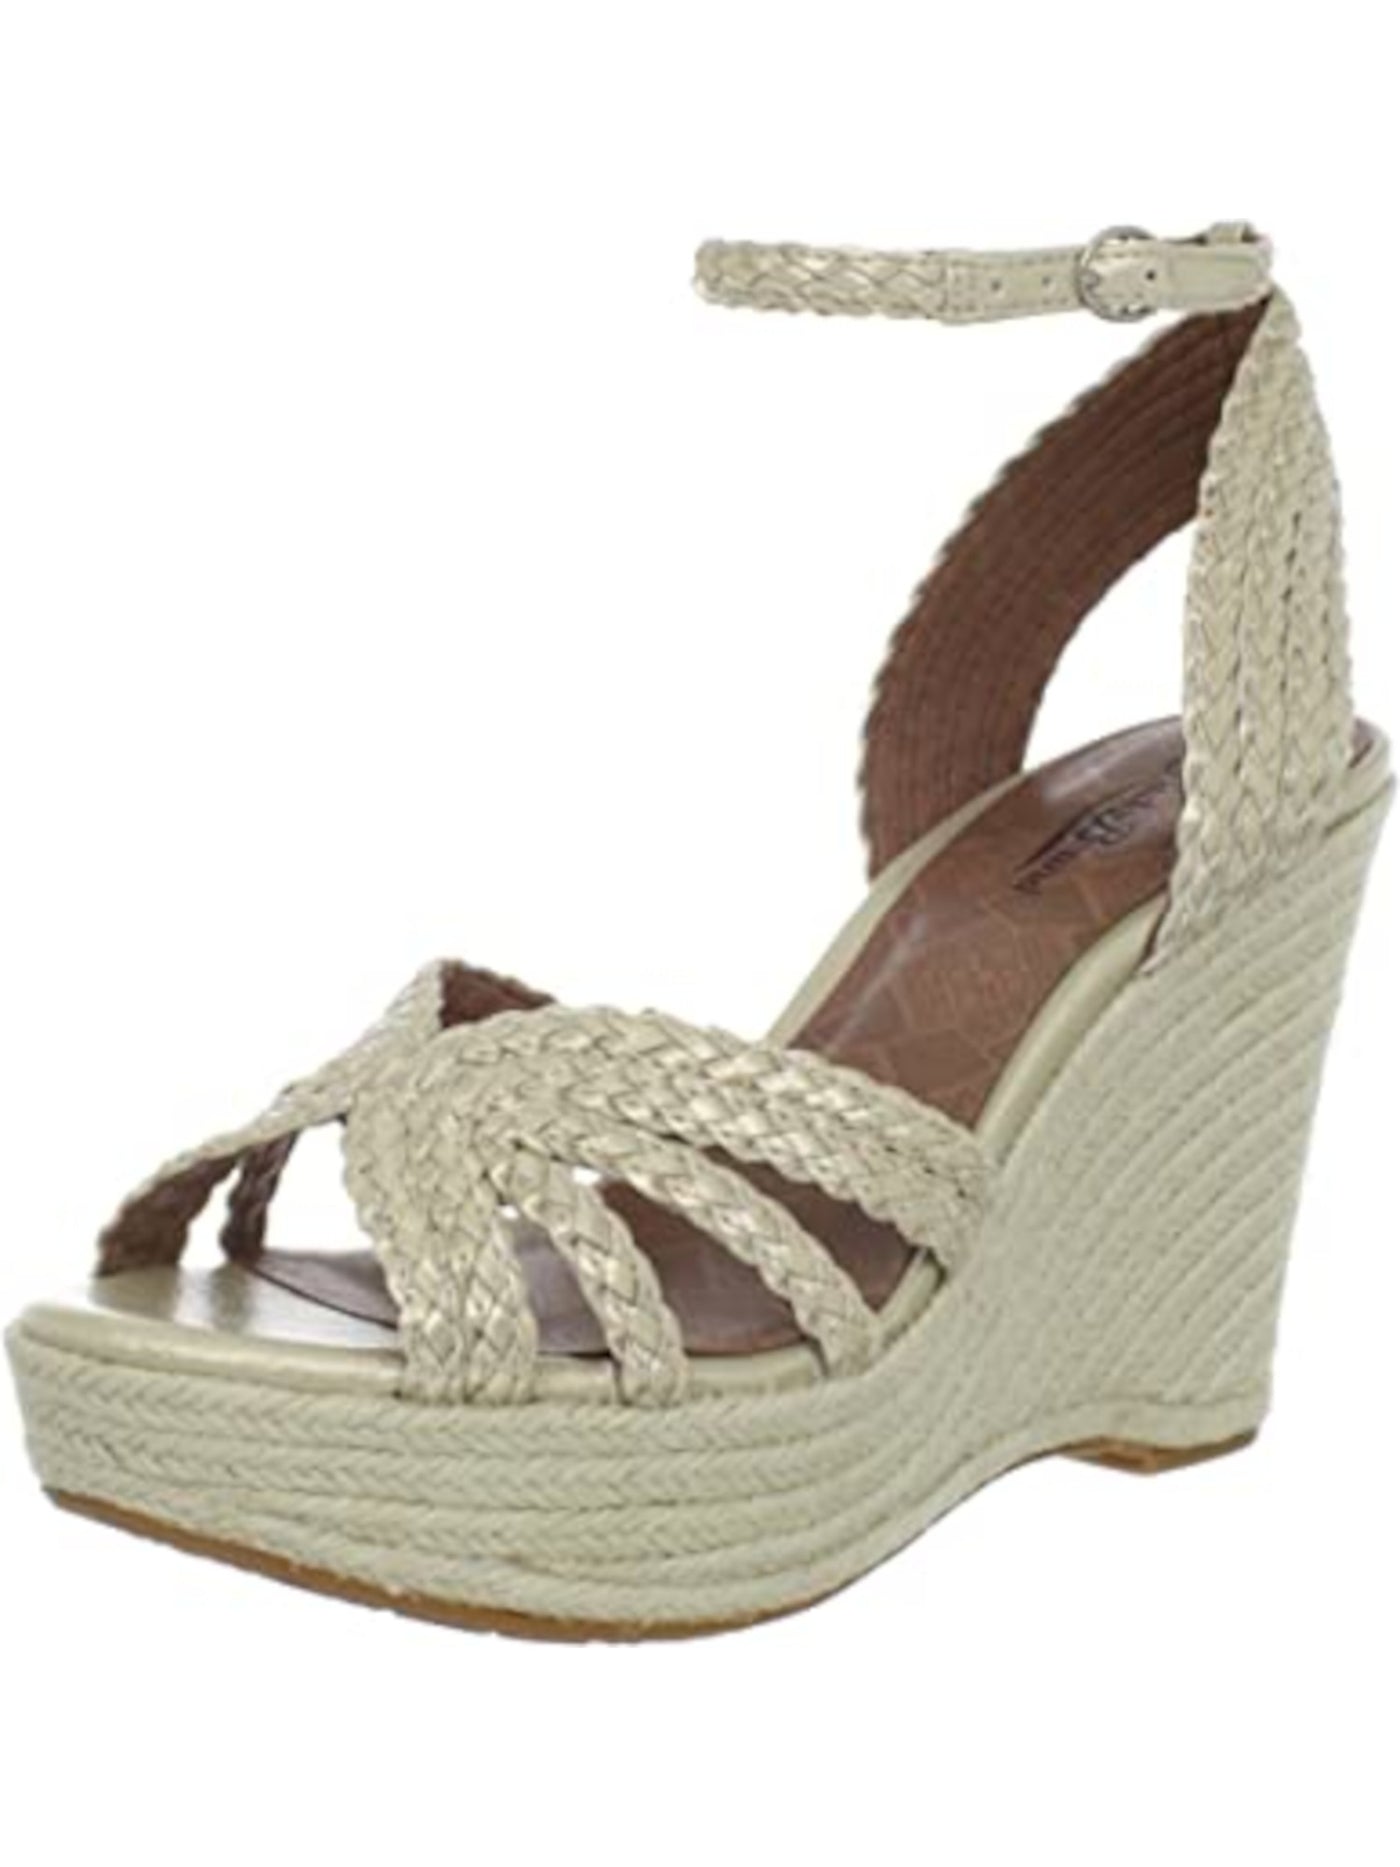 LUCKY BRAND Womens Beige 1-1/2" Platform Lainey Round Toe Wedge Buckle Espadrille Shoes 5.5